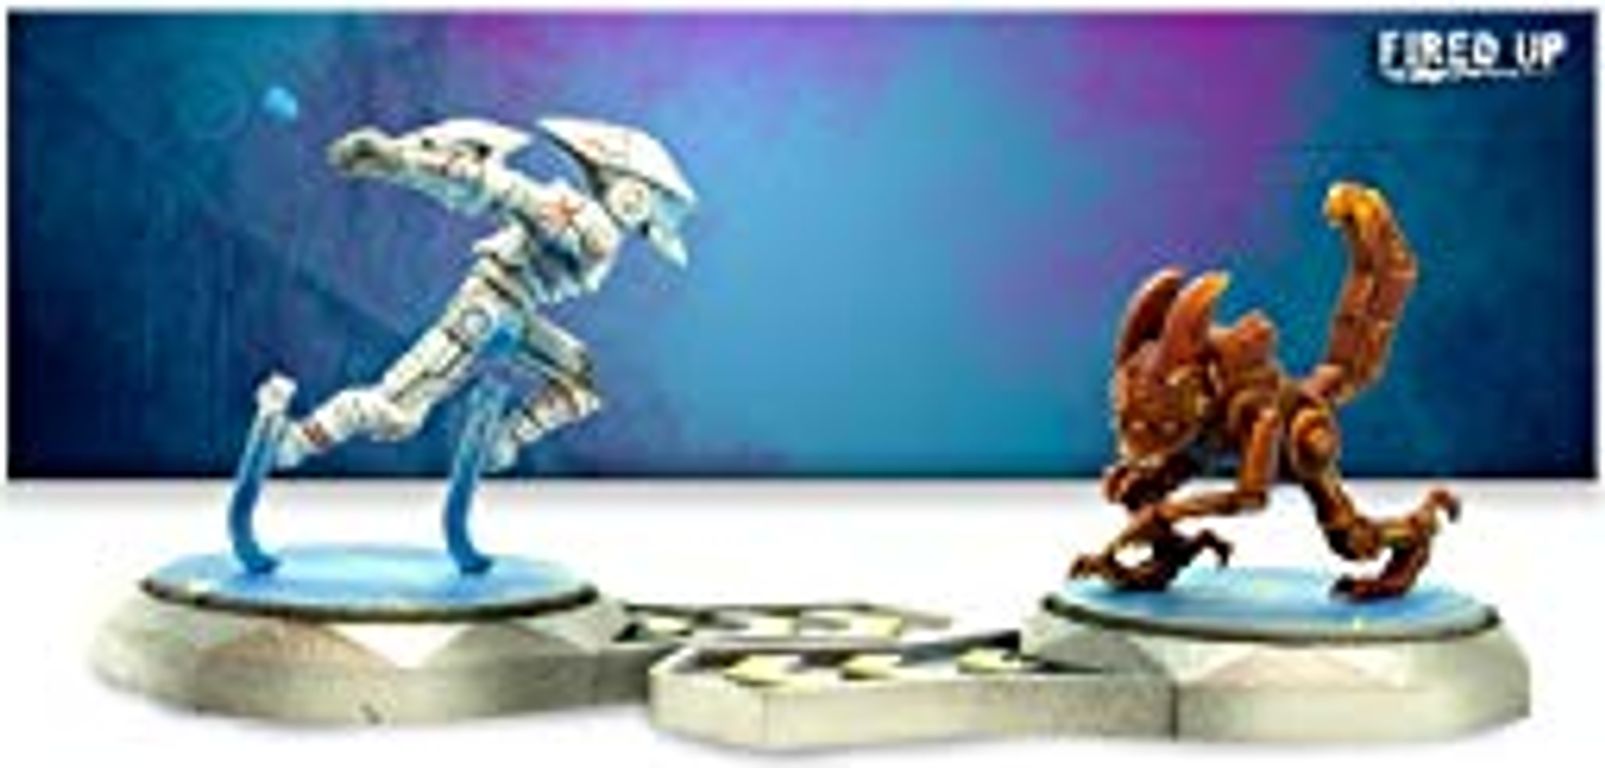 Fired Up: The Agility Expansion miniatures